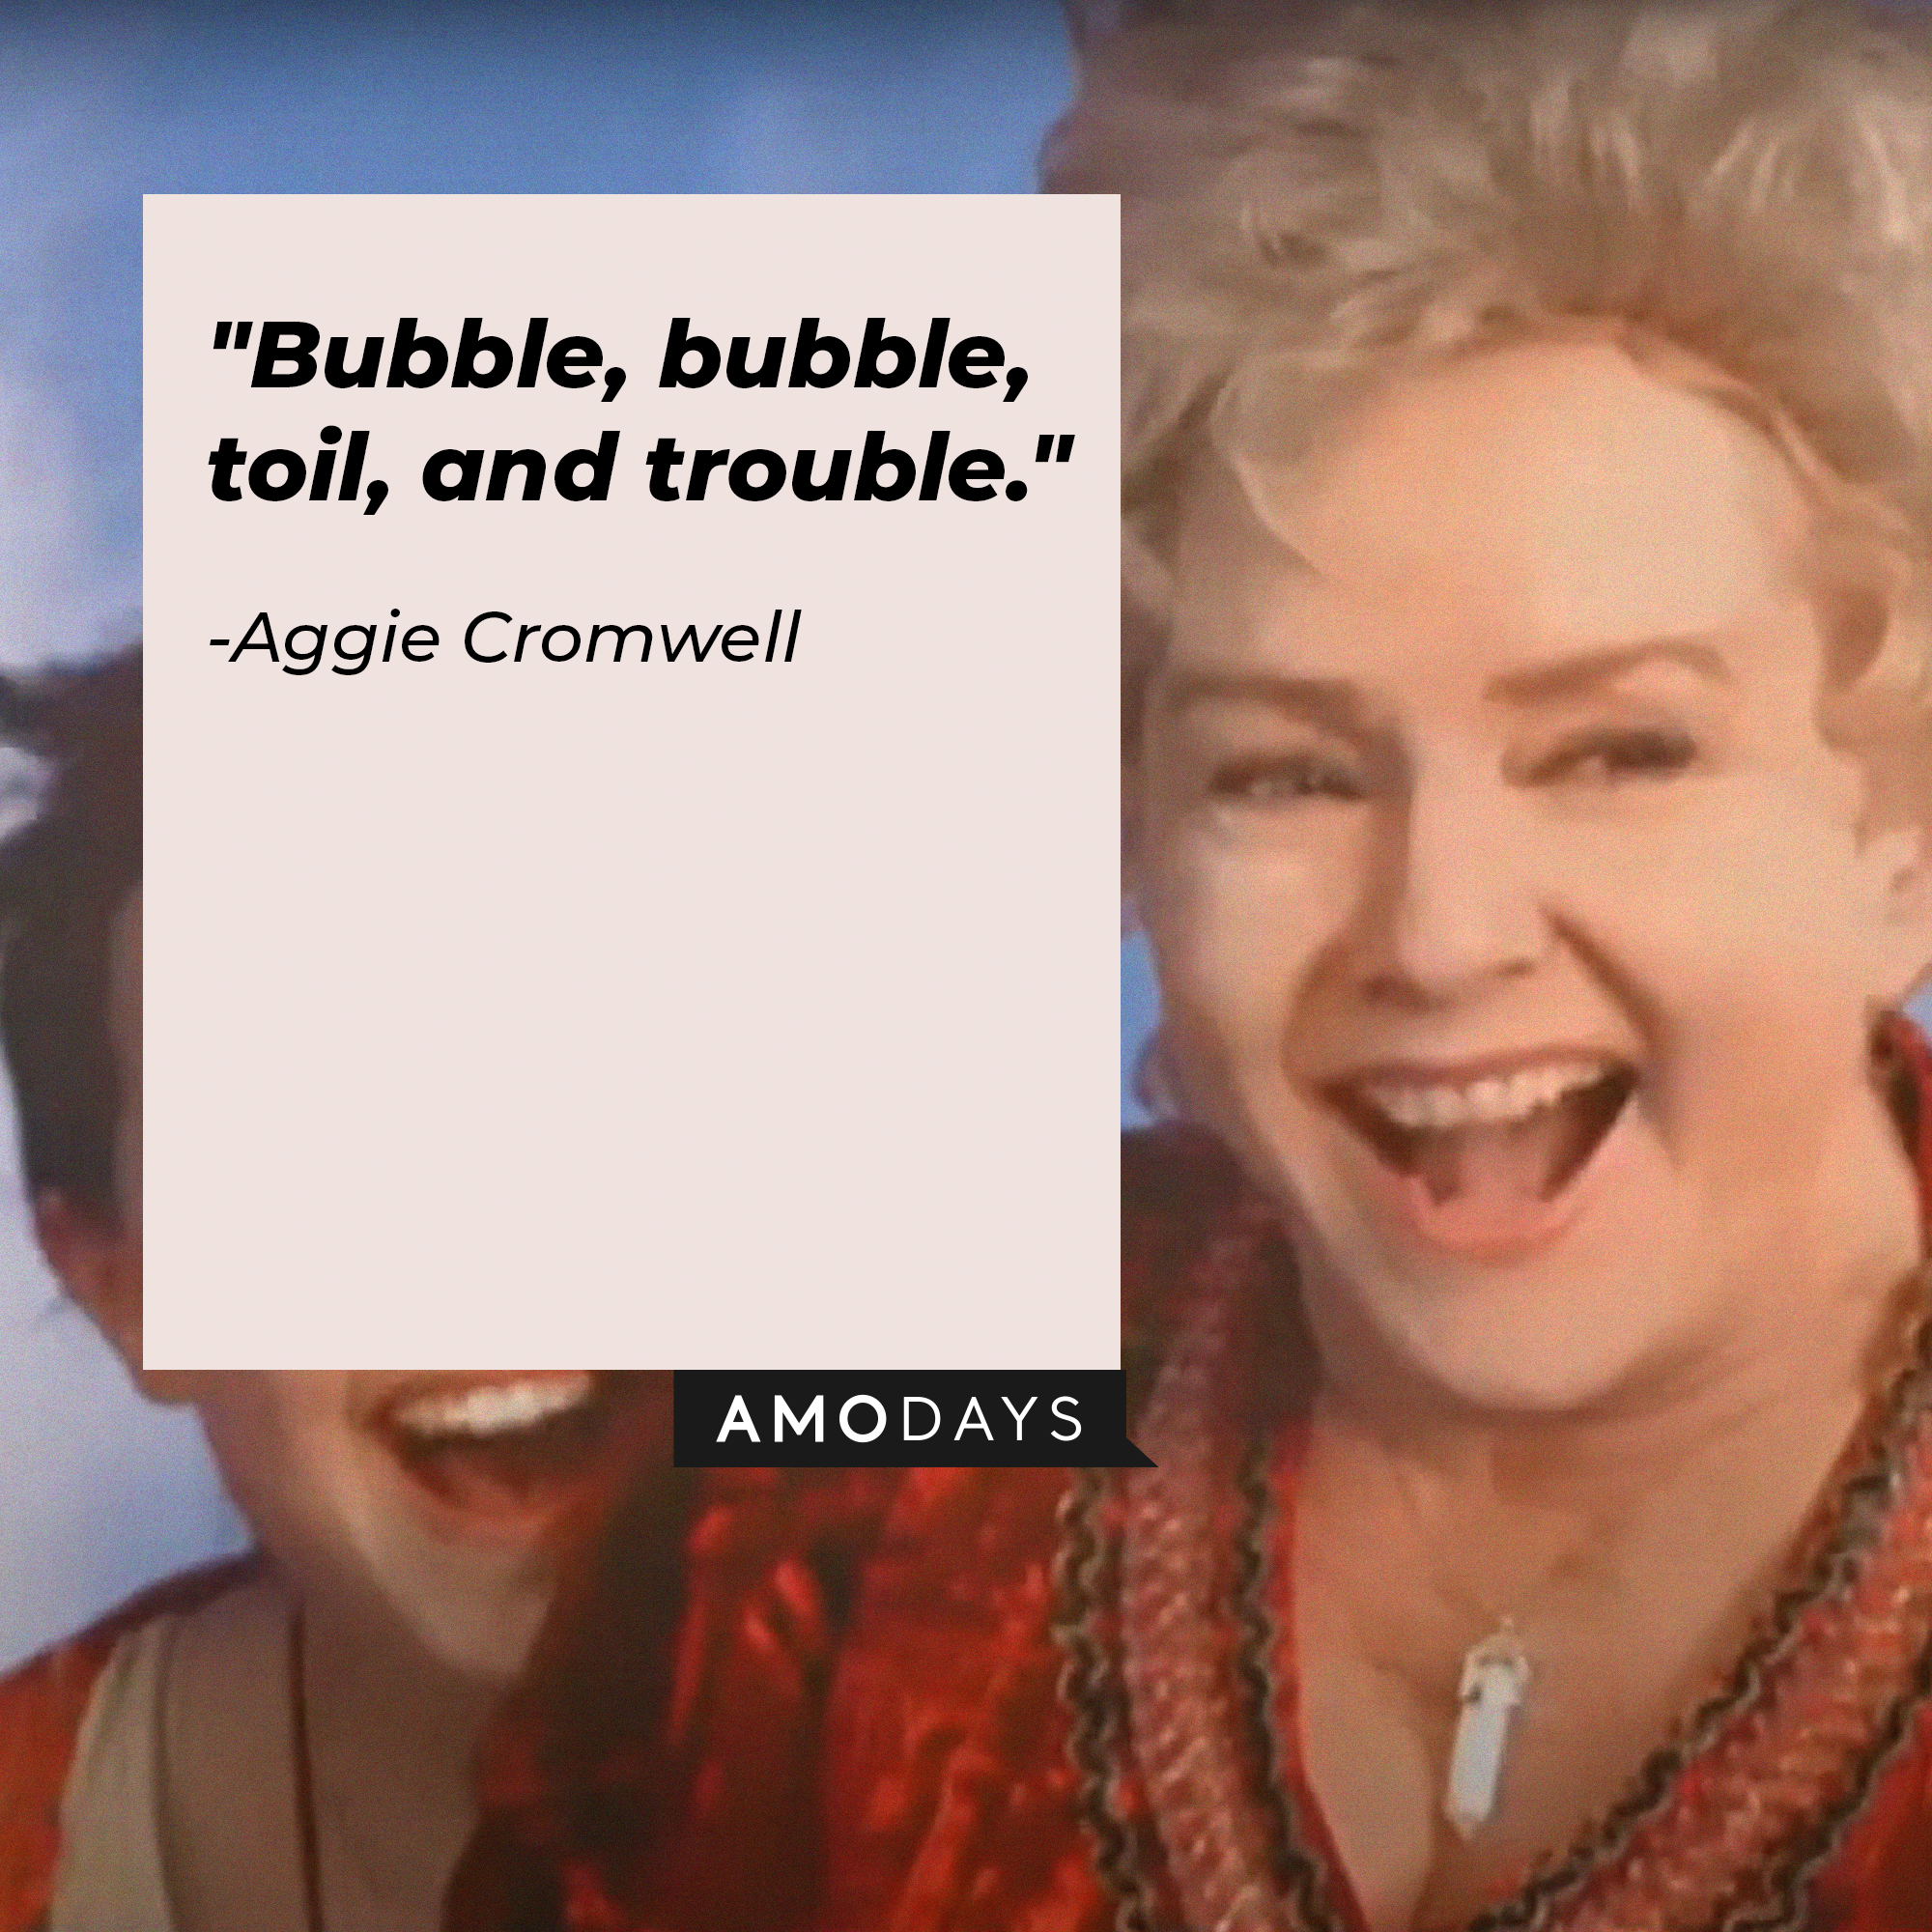 Aggie Cromwell's quote: "Bubble, bubble, toil, and trouble." | Source: Youtube.com/disneychannel